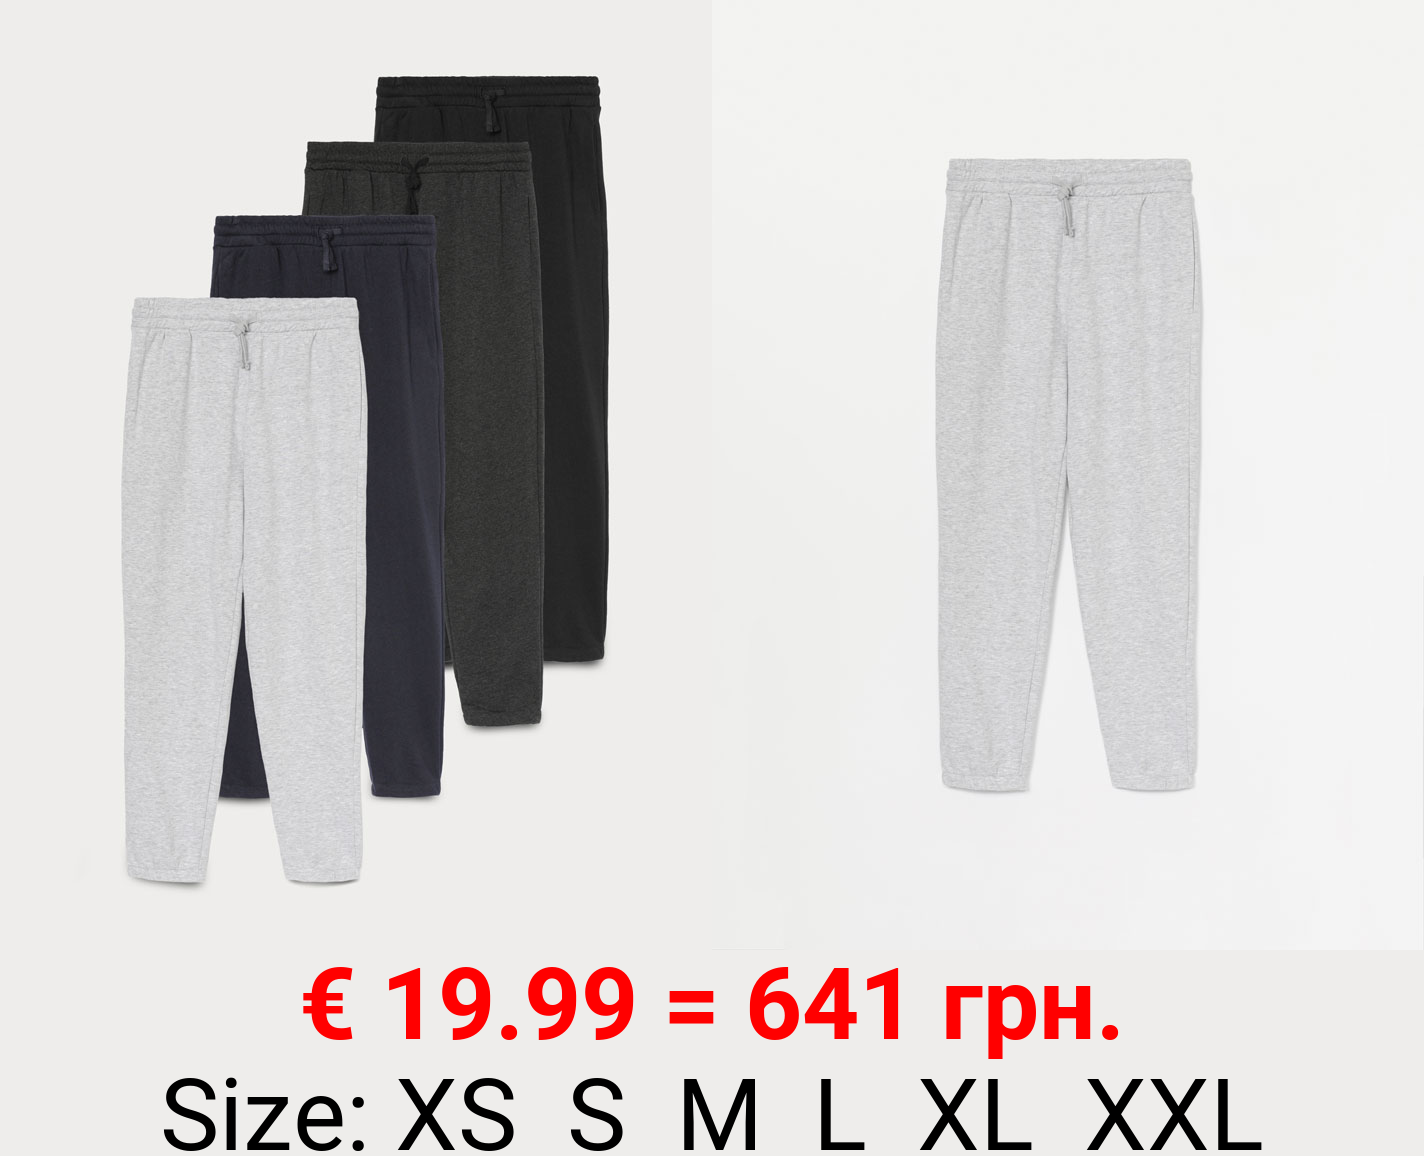 Pack of 4 pairs of basic joggers